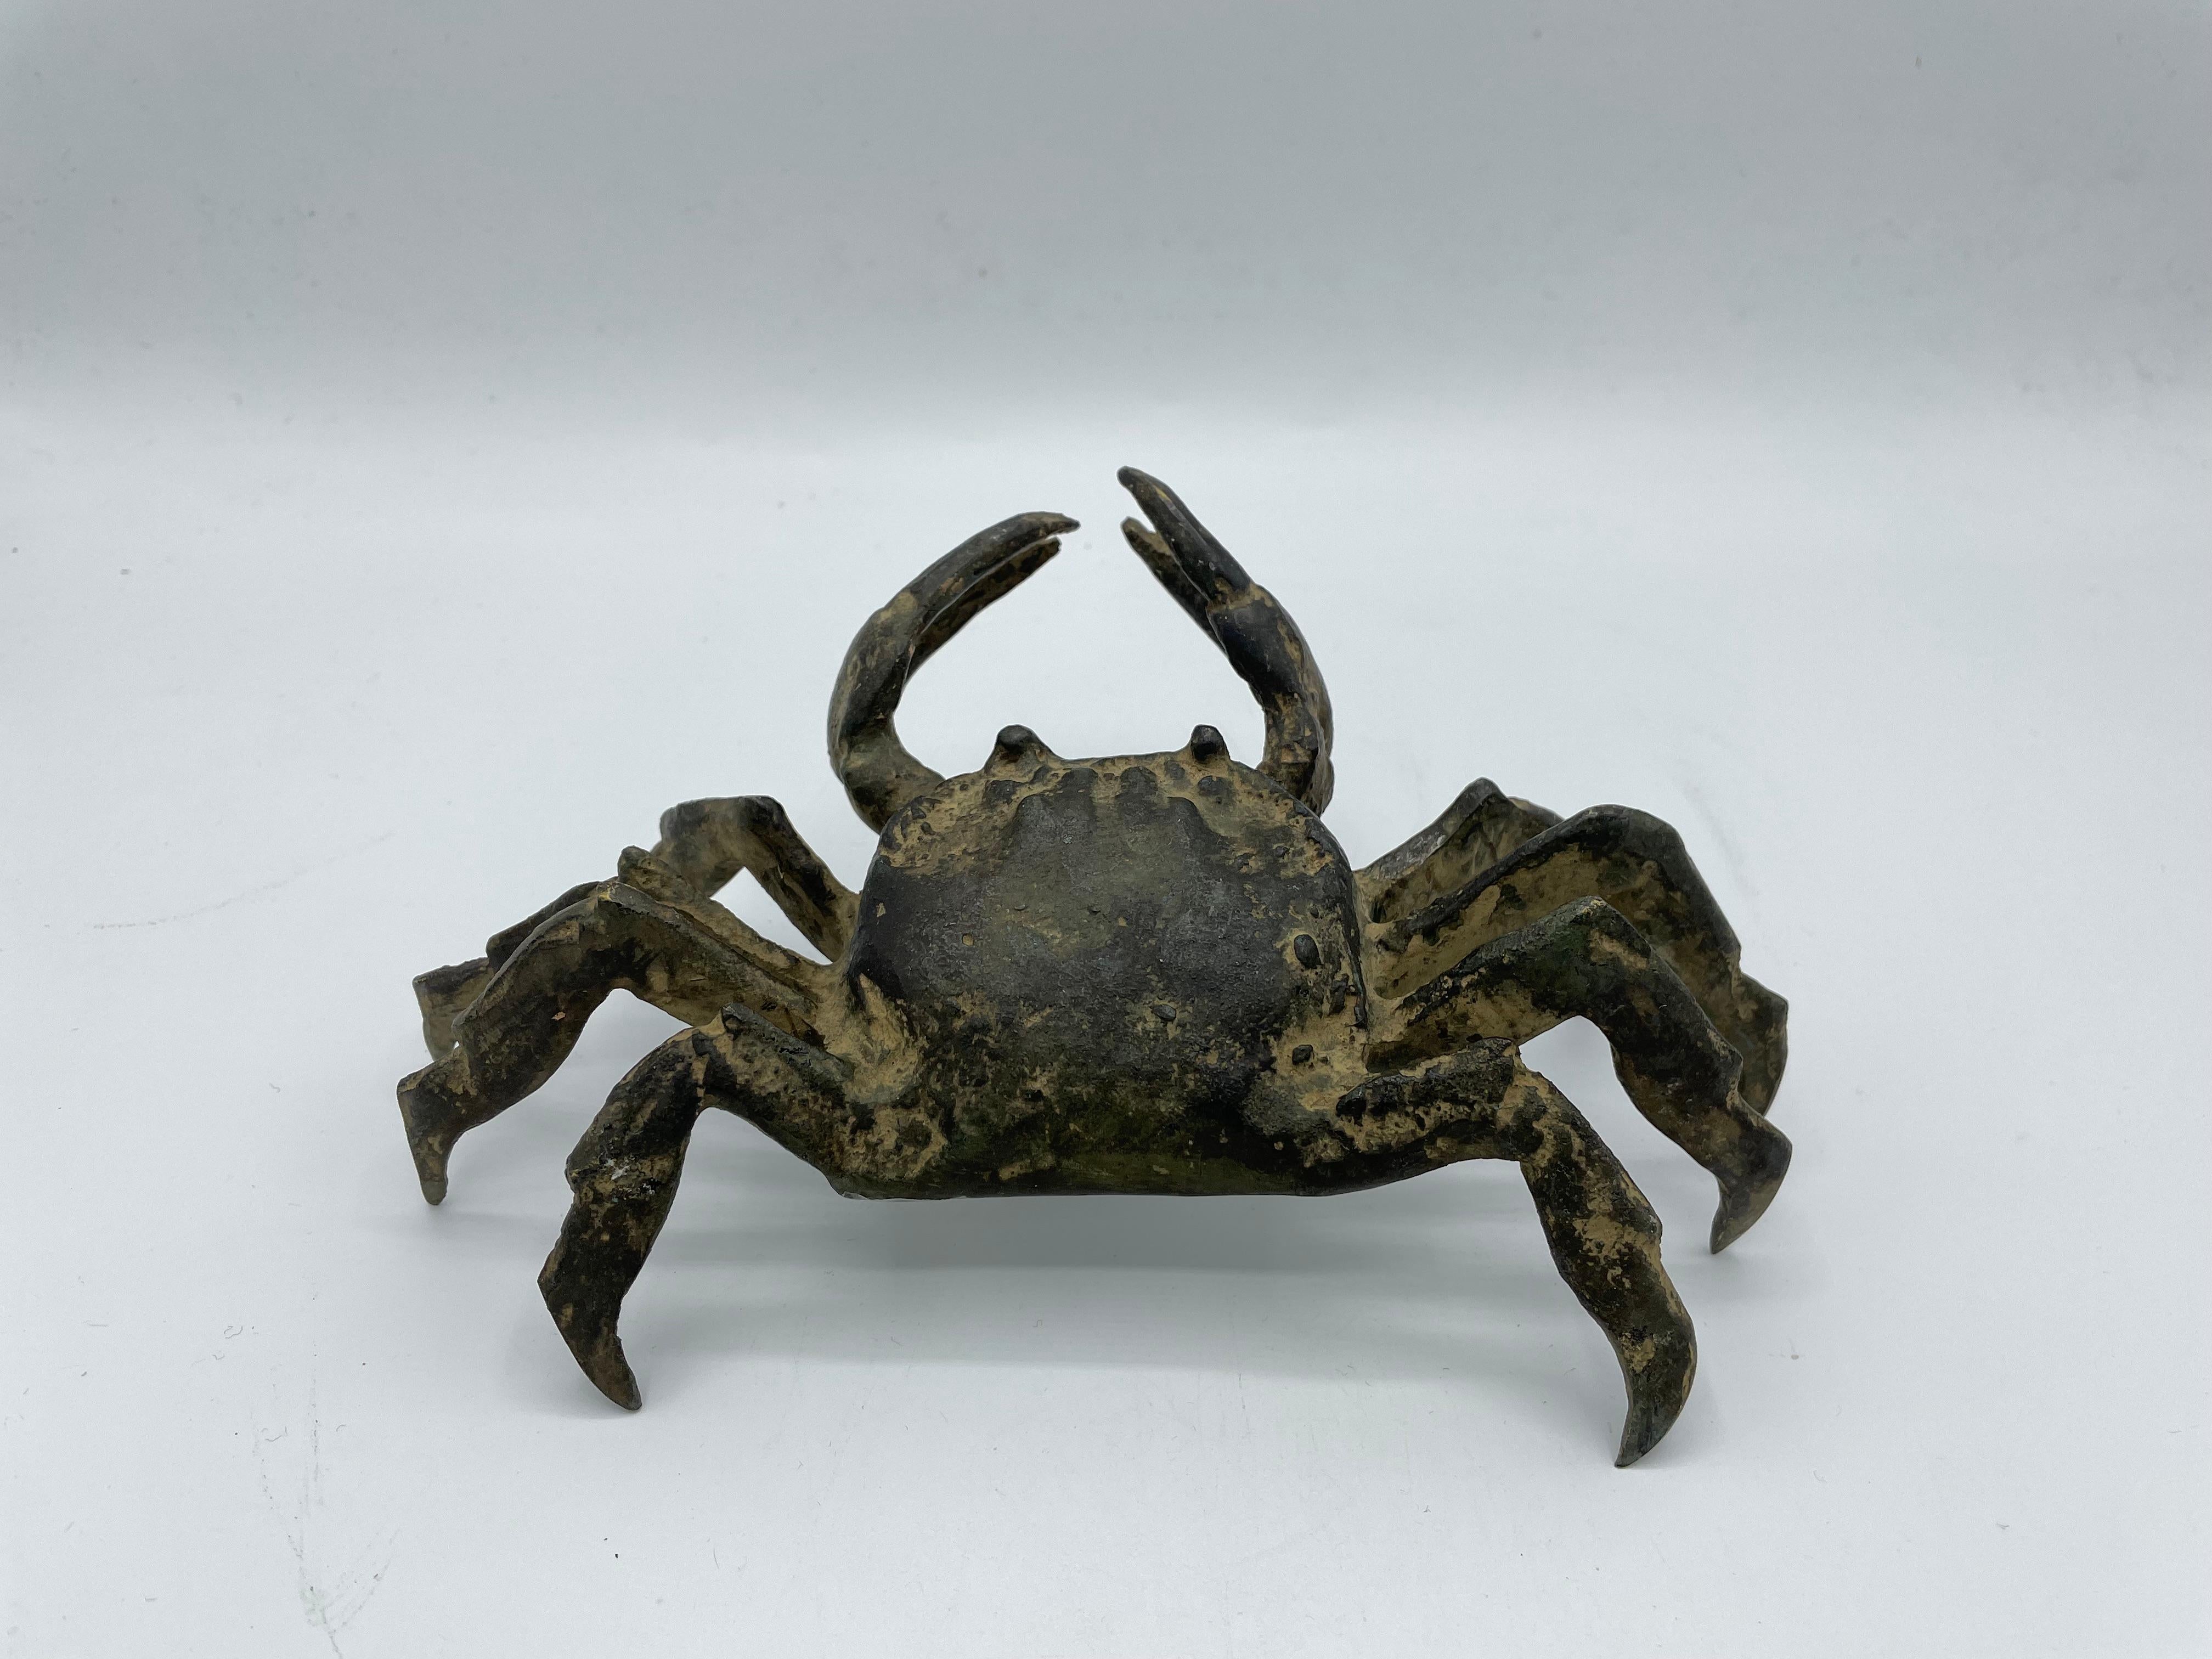 Object of crab with bronze:
A very precious object made before the second world war, when bronze was rare to find.
There are a signature 'N' on the bottom of this crab in red.

-Details-
Era: Showa (around 1930-1939)
Materials: bronze

Dimensions